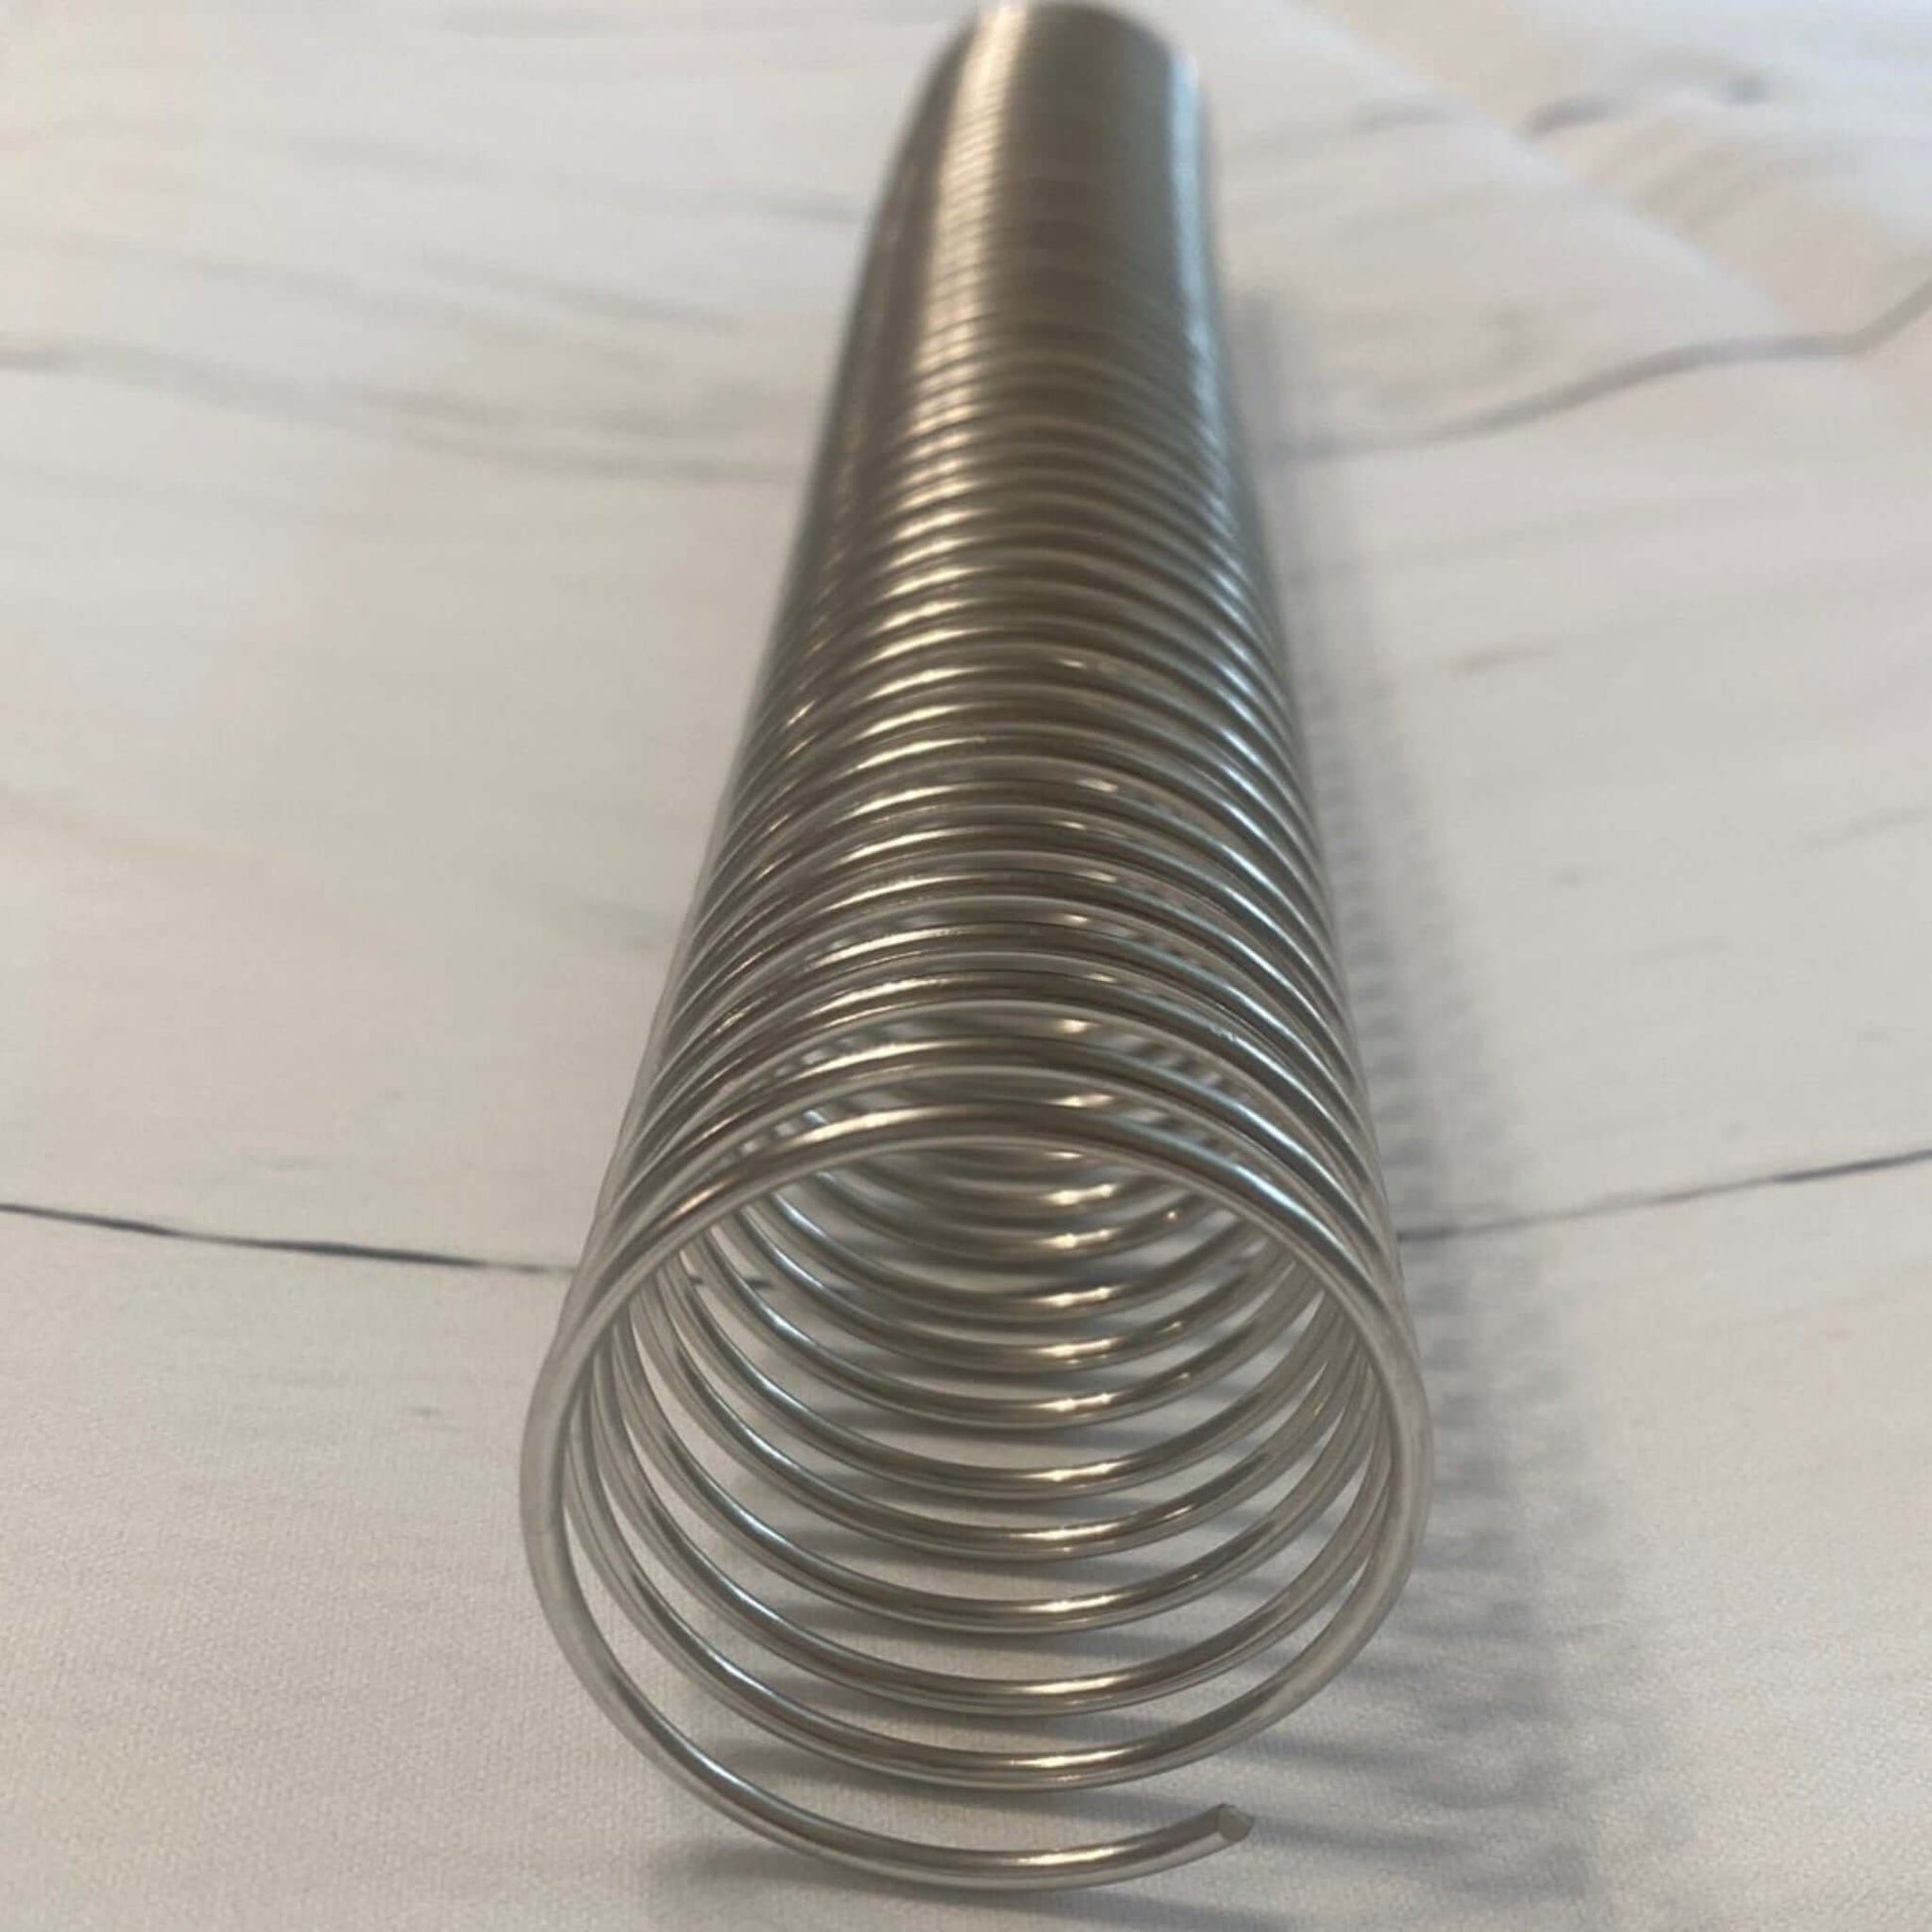 1 1/2" Replacement Spiral - By When? Planner Co.